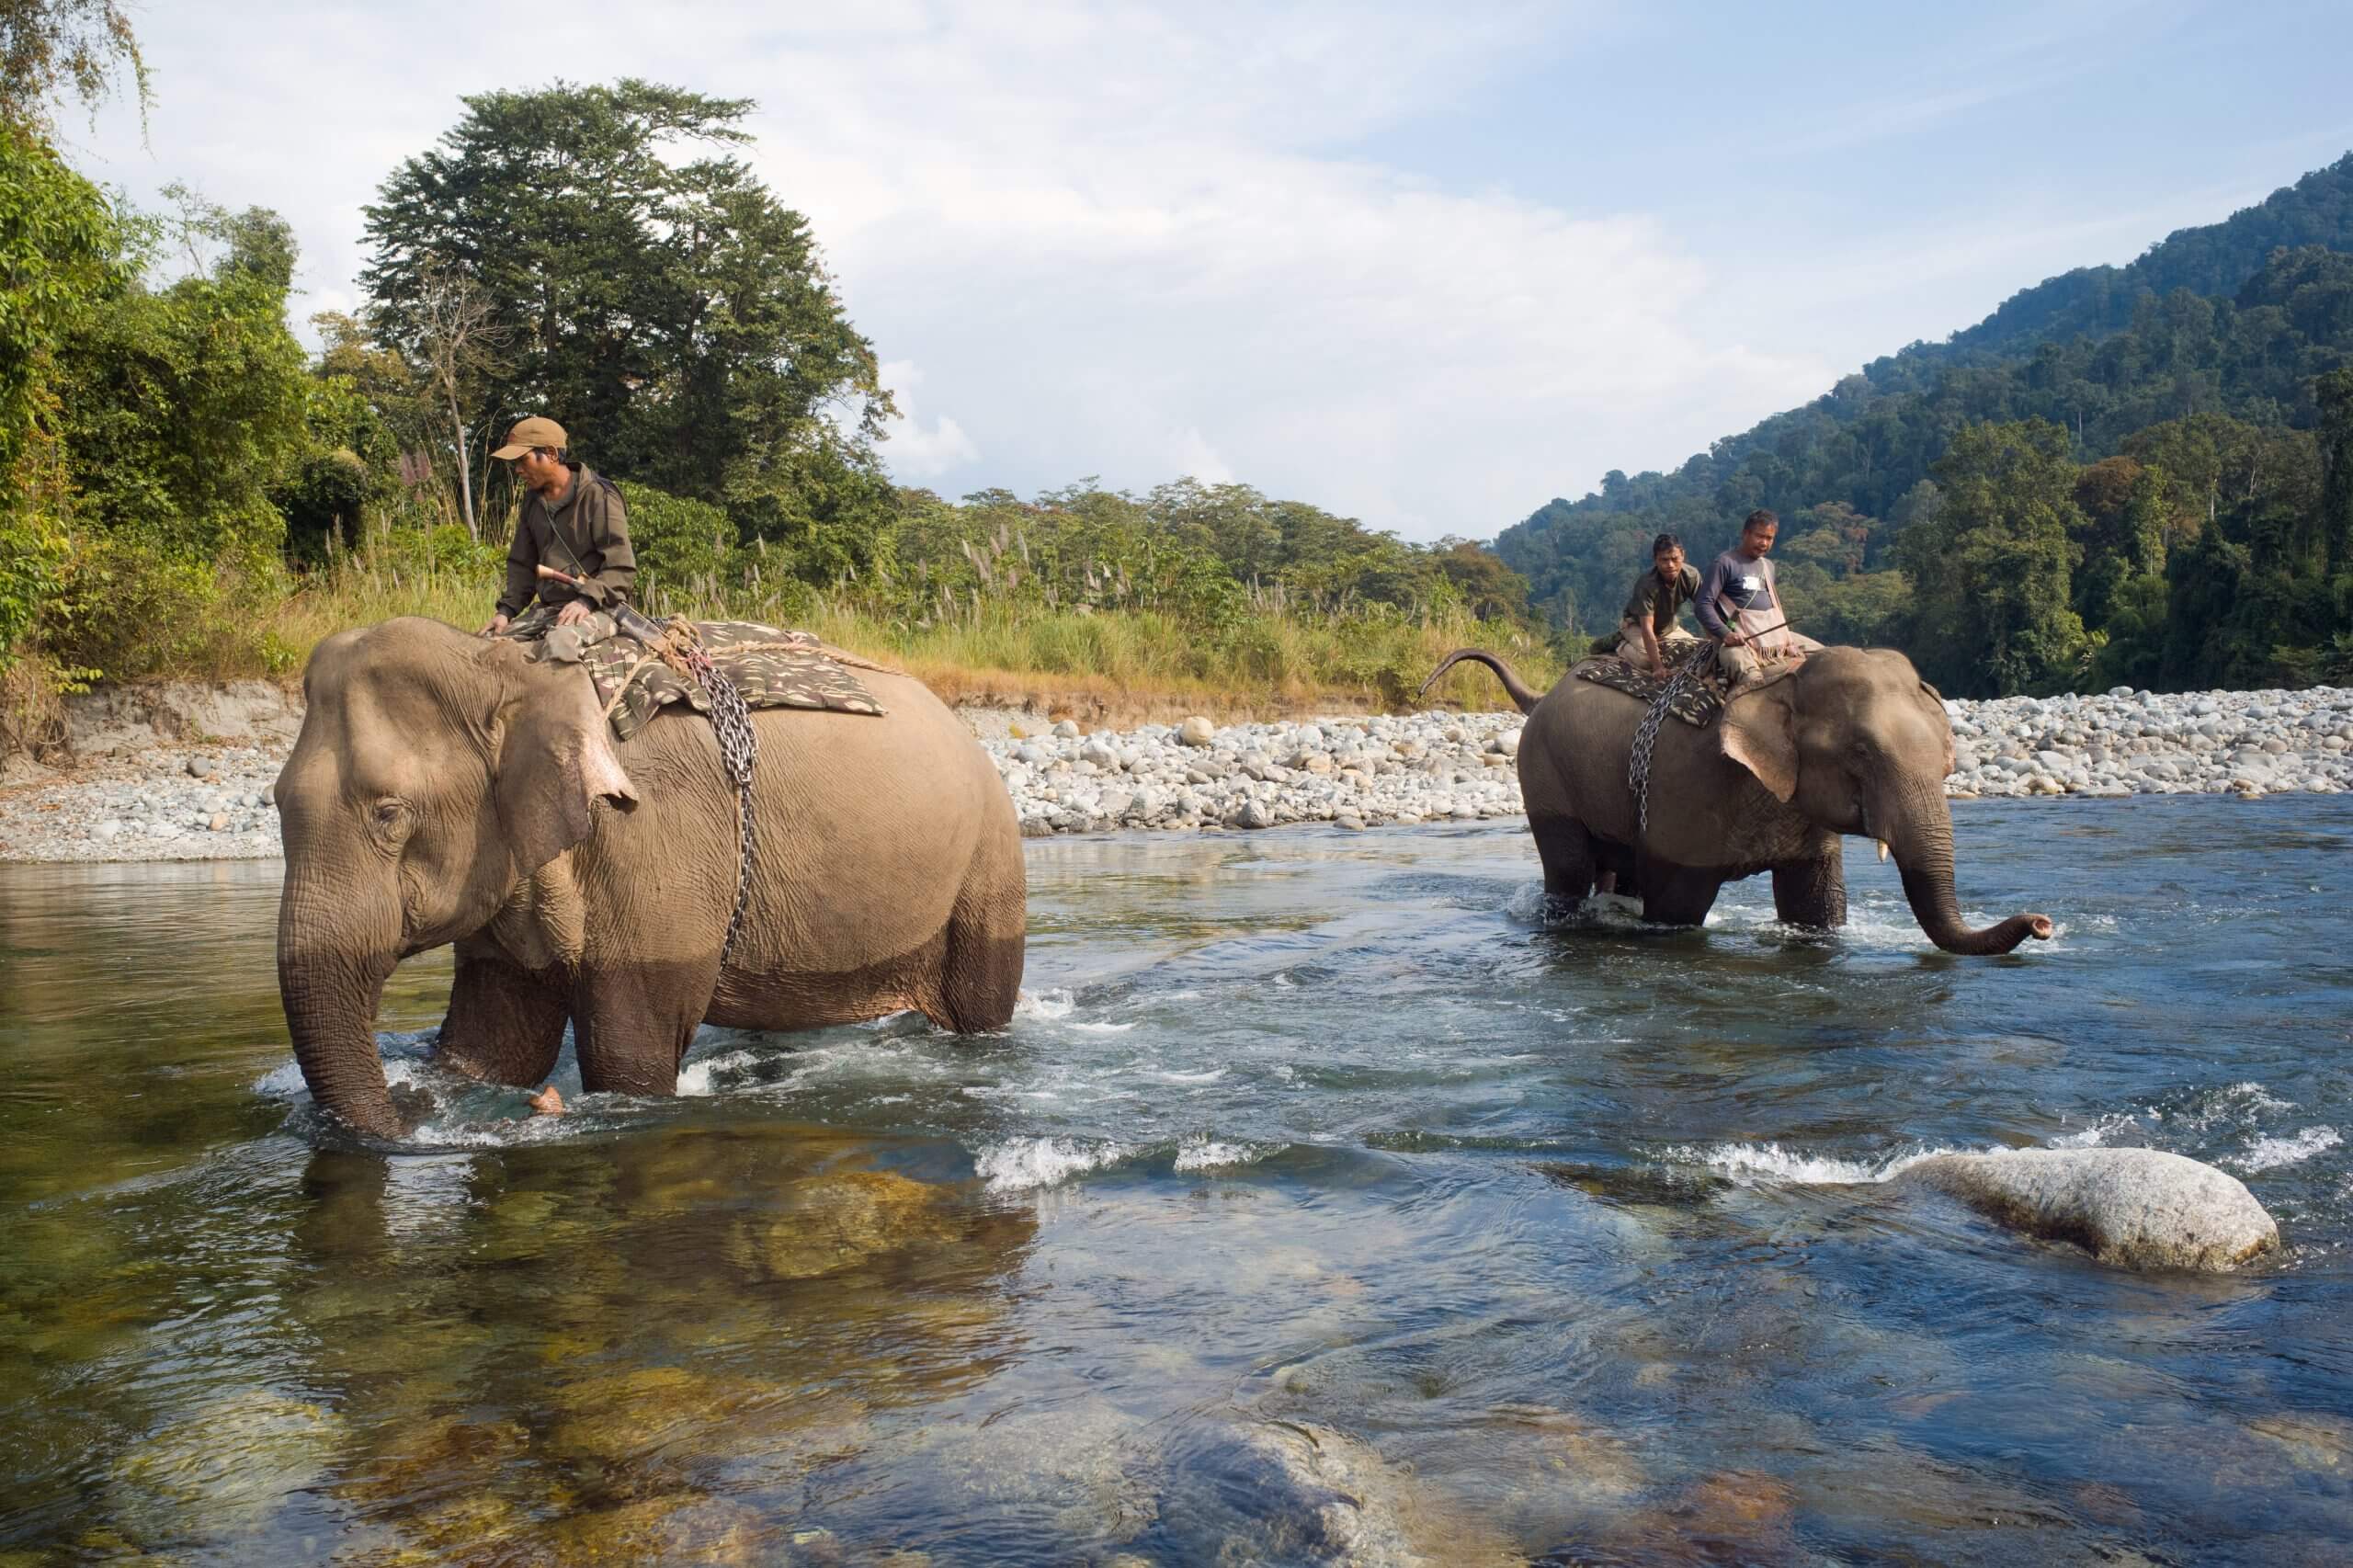 Scenes of an Indian forest with elephants crossing a river.